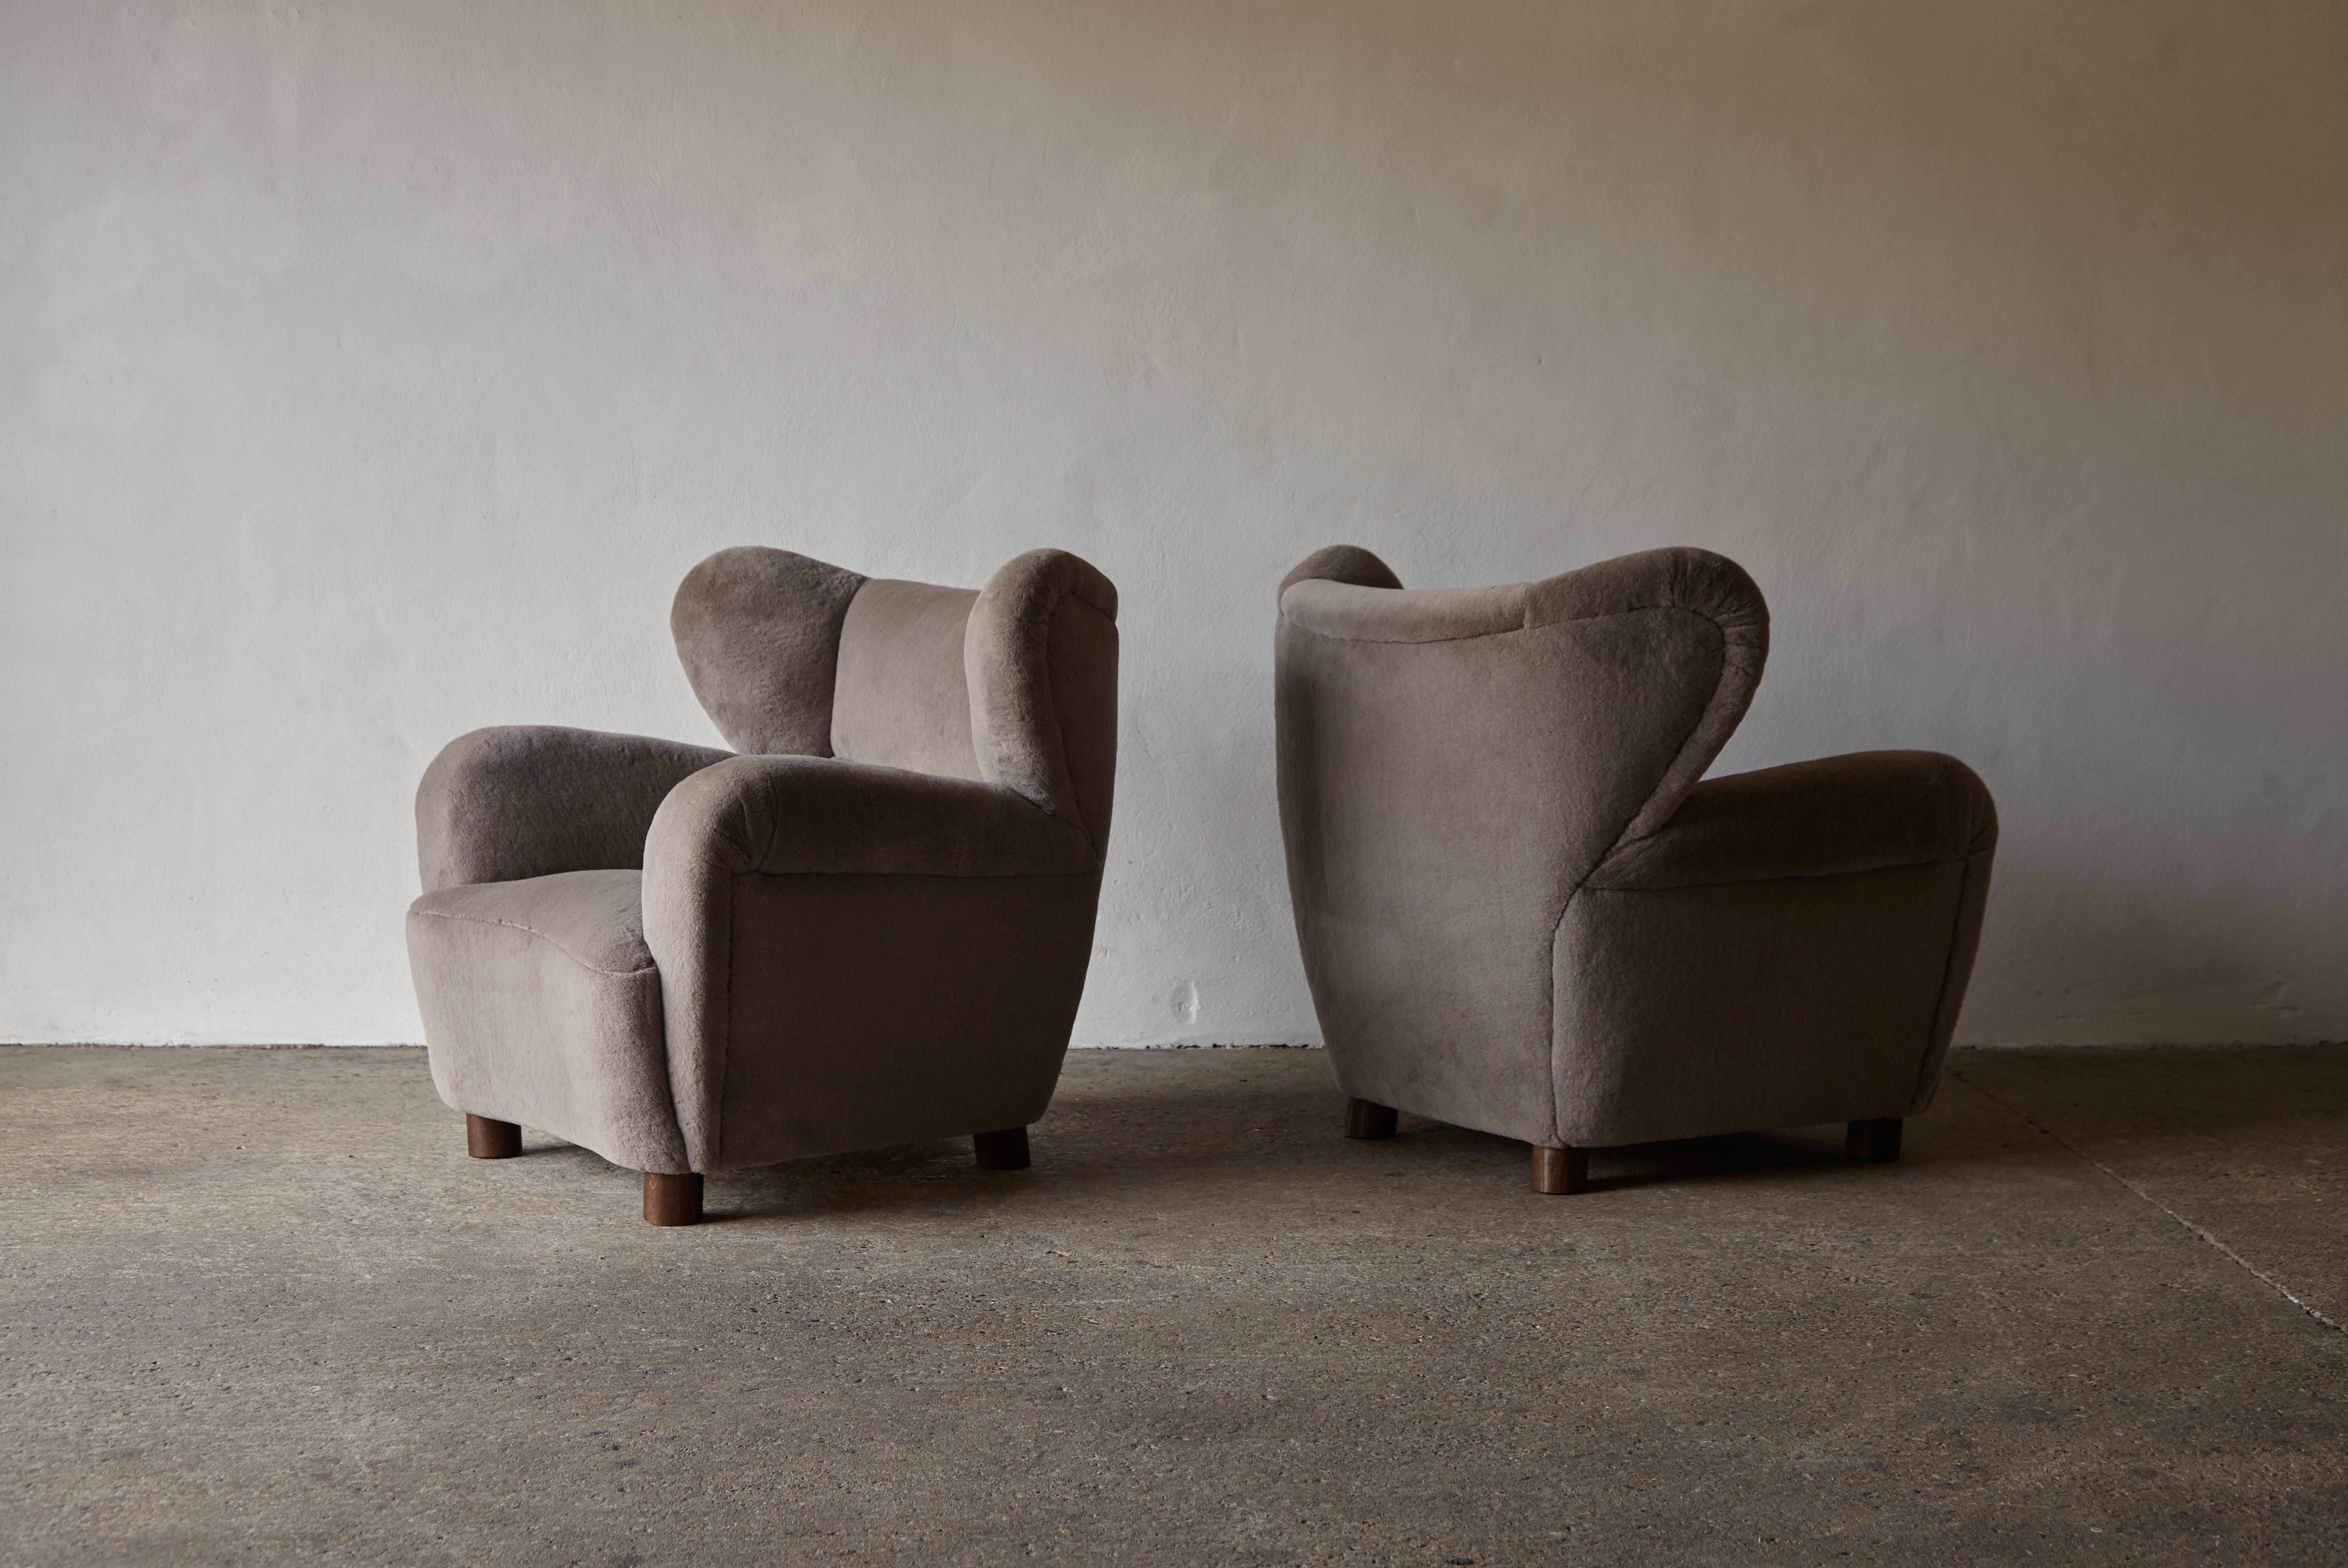 Superb Pair of Armchairs, Newly Upholstered in Pure Alpaca, Denmark, 1940s / 50s 1